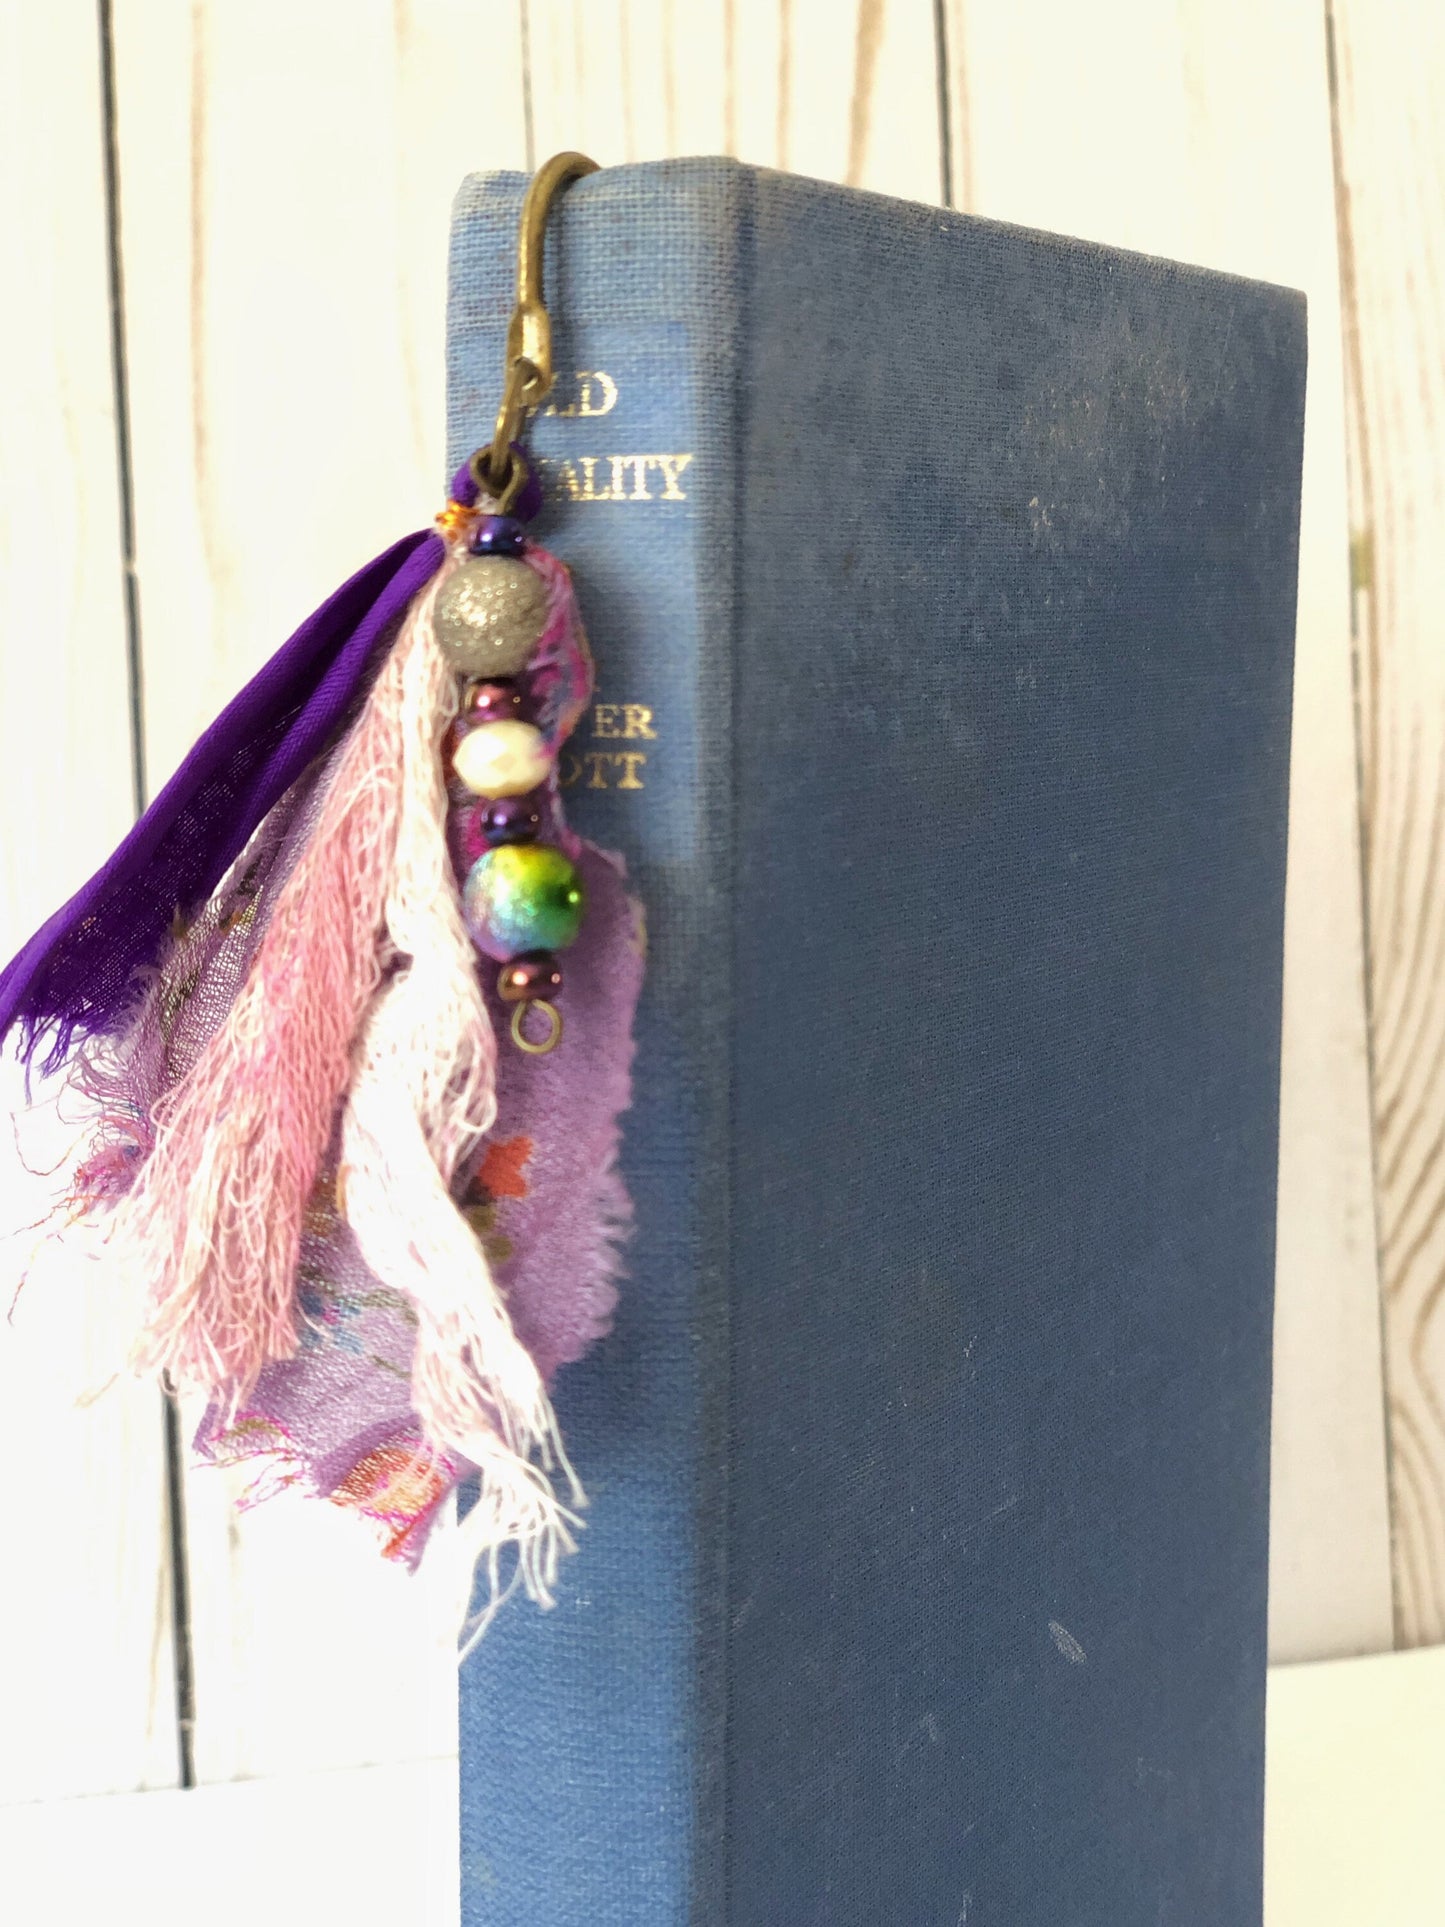 Metal Bookmark with Beads, Book Spine Jewelry, Decorative Page Marker with Charm, Bookish Gift ideas for Bookworms, Planner Spine Decor gift